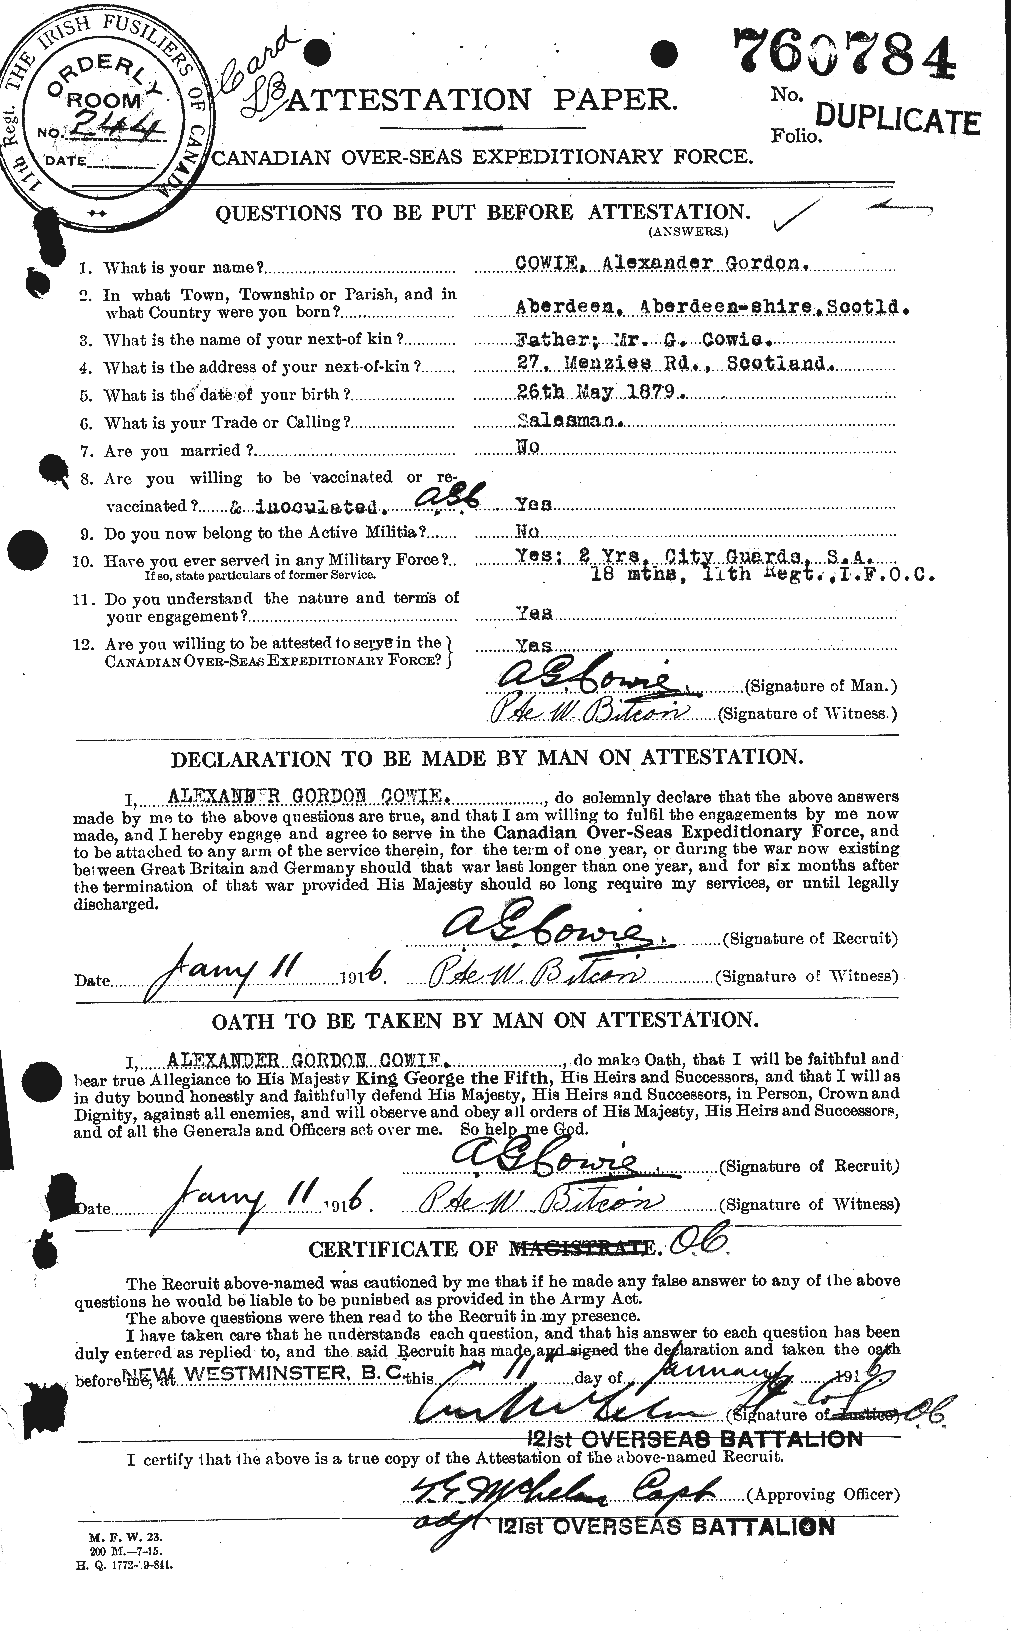 Personnel Records of the First World War - CEF 060043a